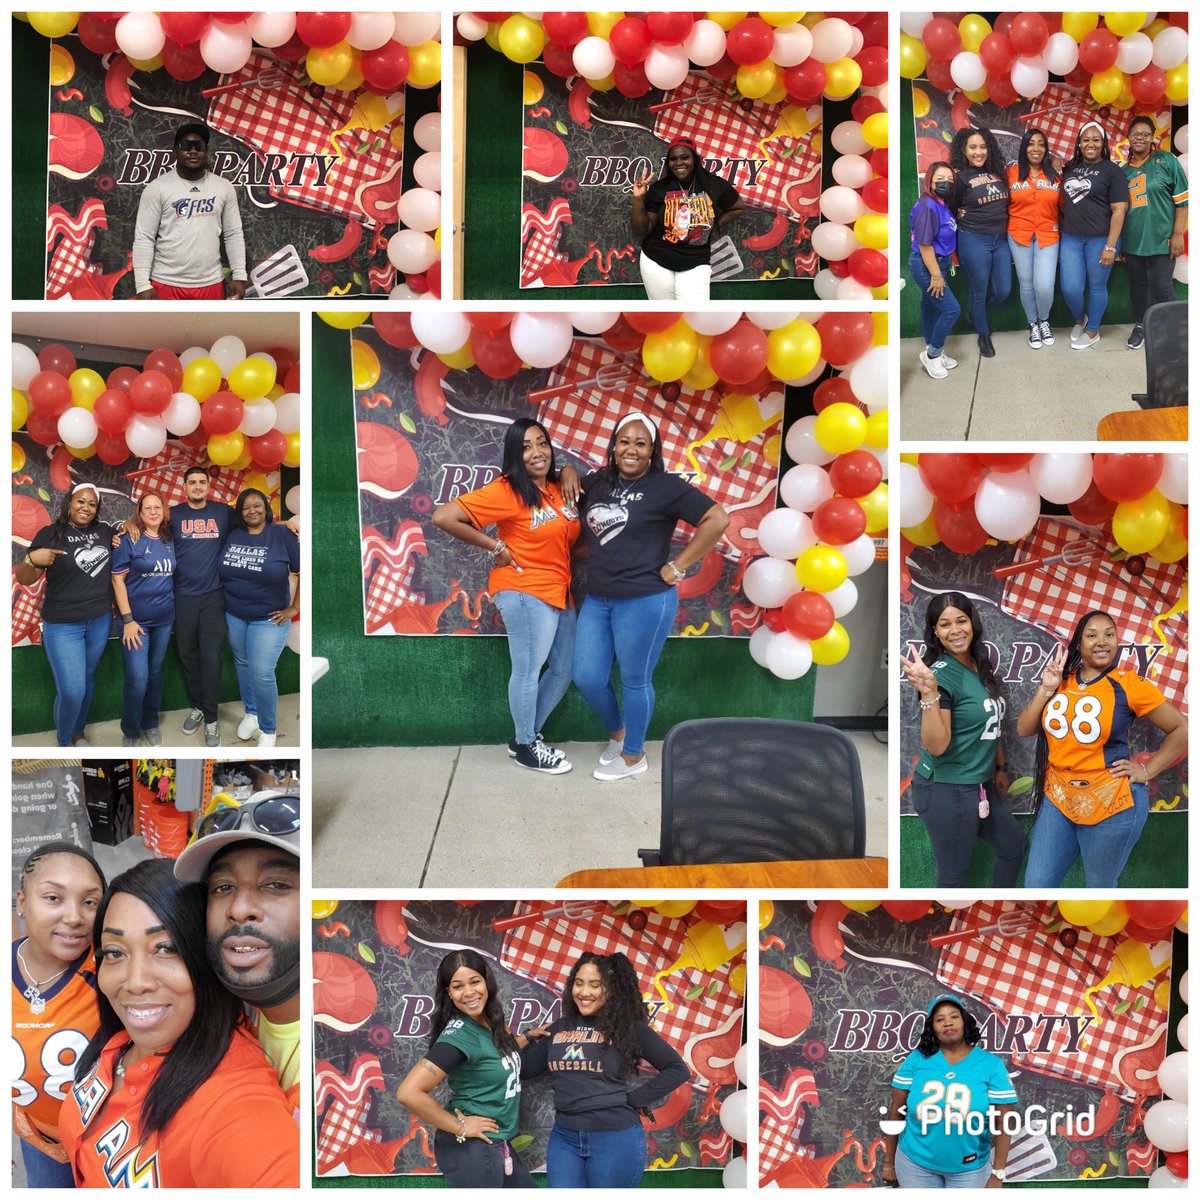 CAM sports day over at 0207 #CAM2022 #backyardparty